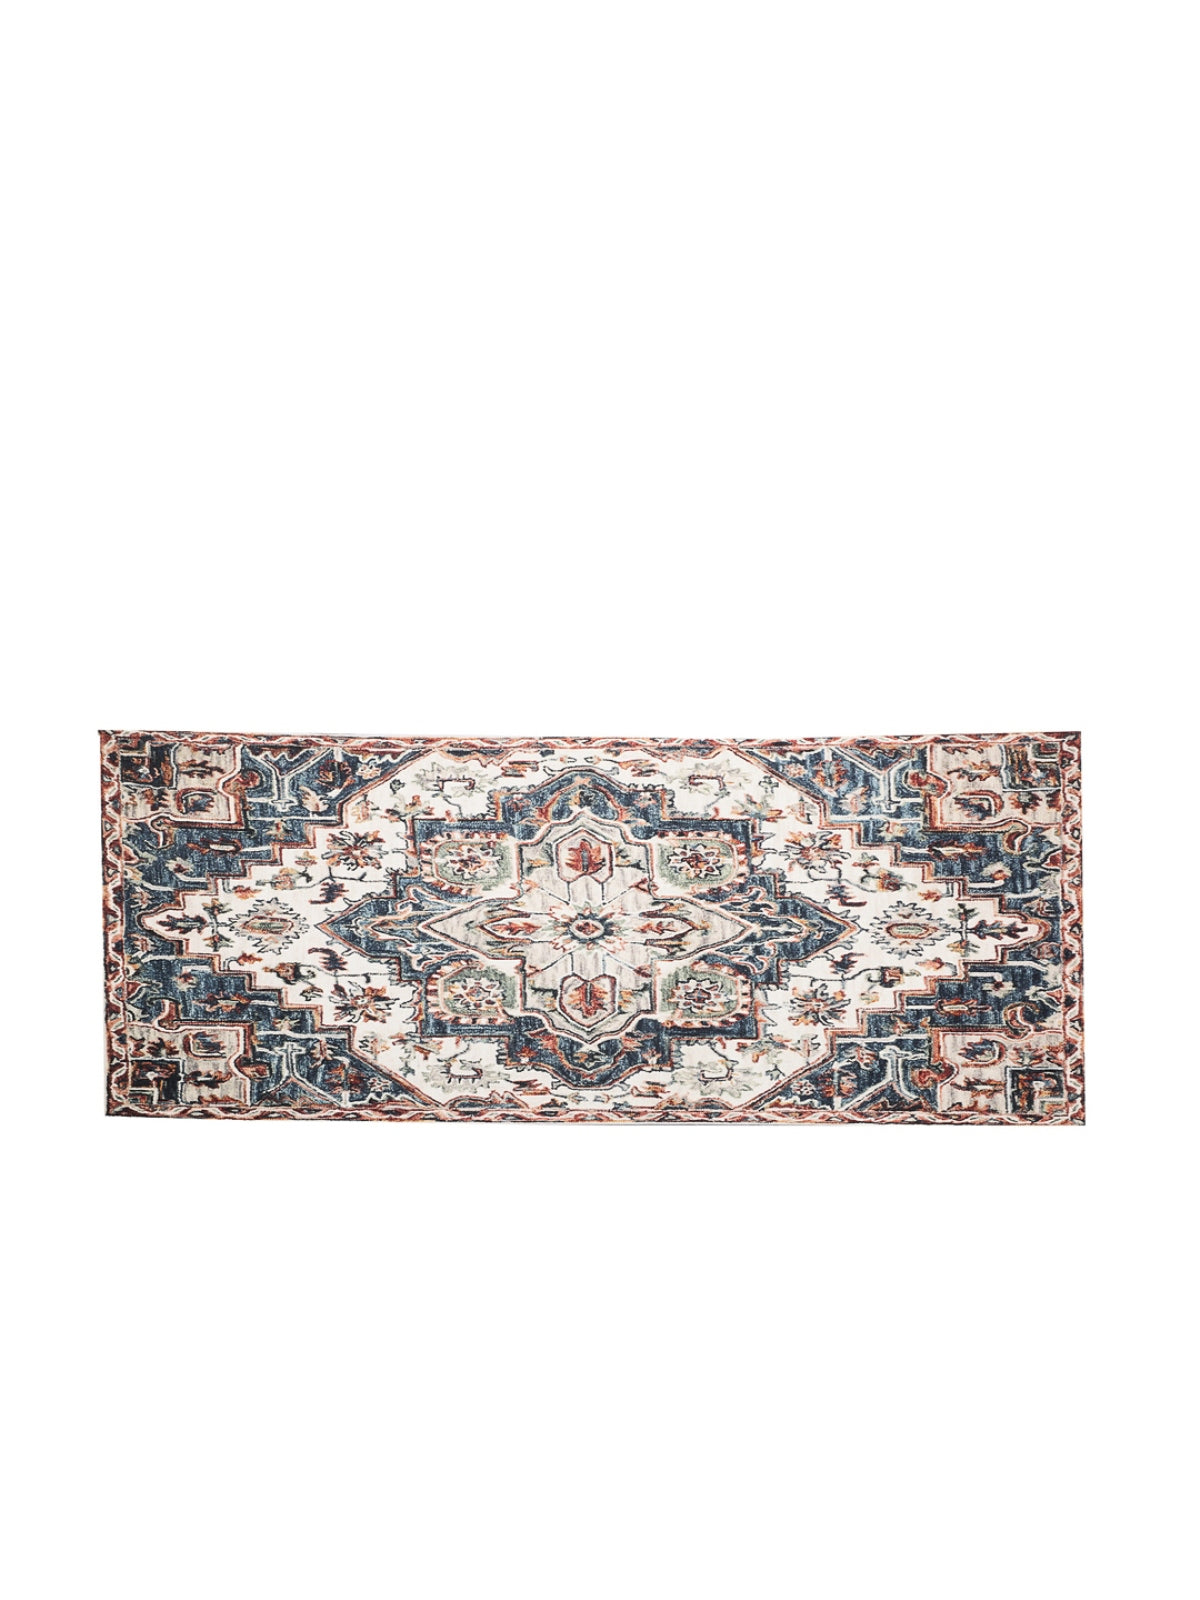 Blue & Cream 22 inch x 55 inch Ethnic Motifs Patterned Bed Runner